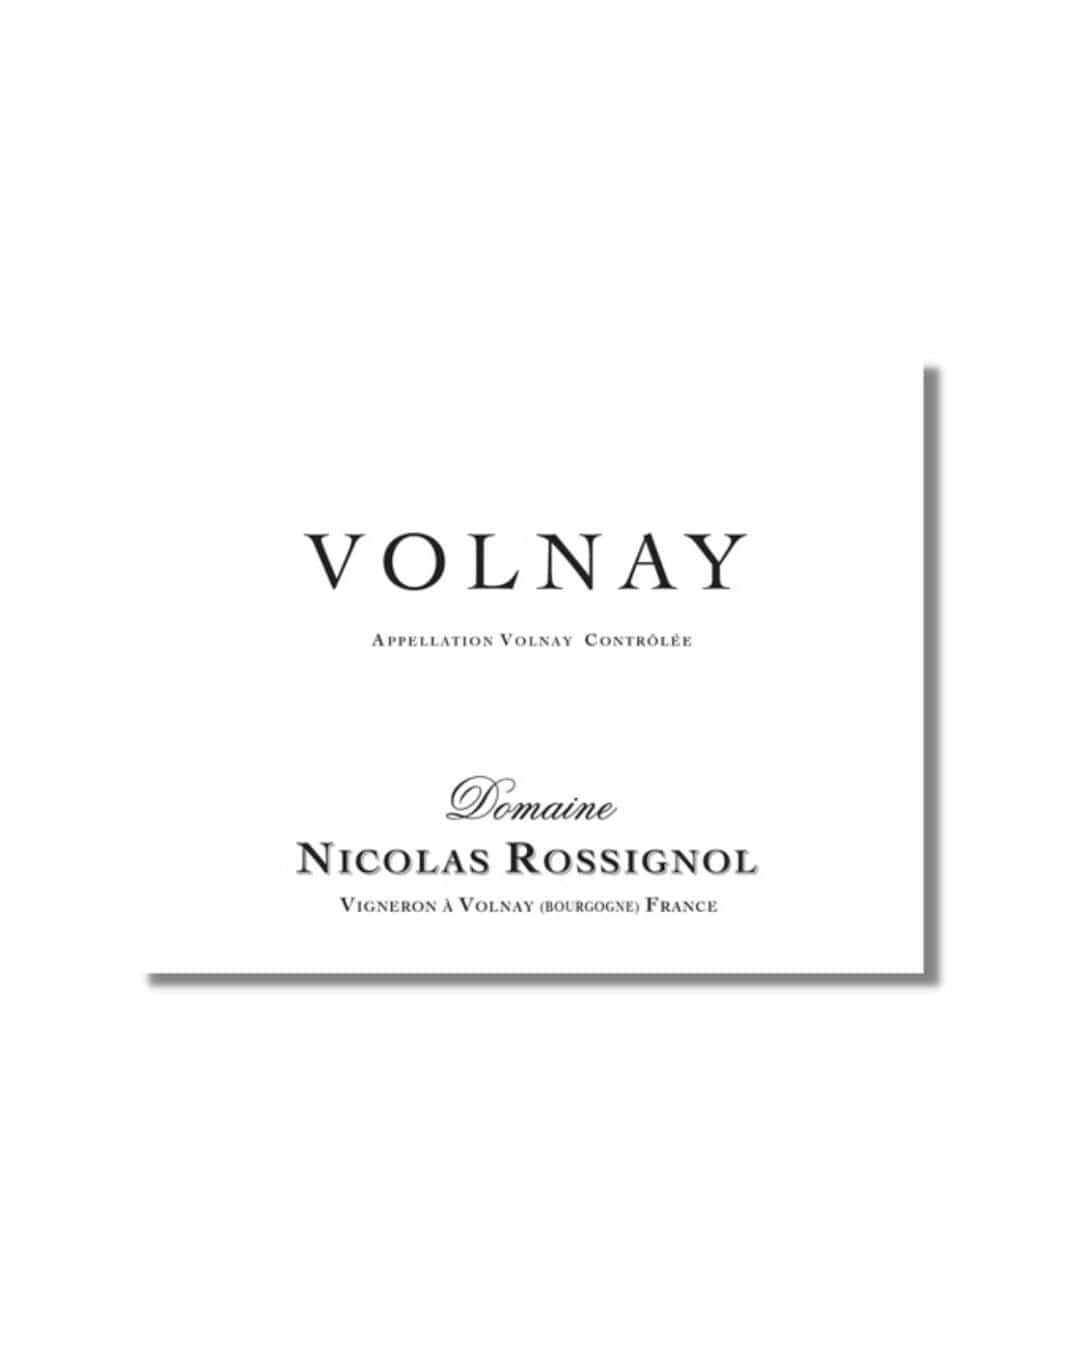 Shop Domaine Nicolas Rossignol Domaine Nicolas Rossignol Volnay 2017 online at PENTICTON artisanal French wine store in Hong Kong. Discover other French wines, promotions, workshops and featured offers at pentictonpacific.com 